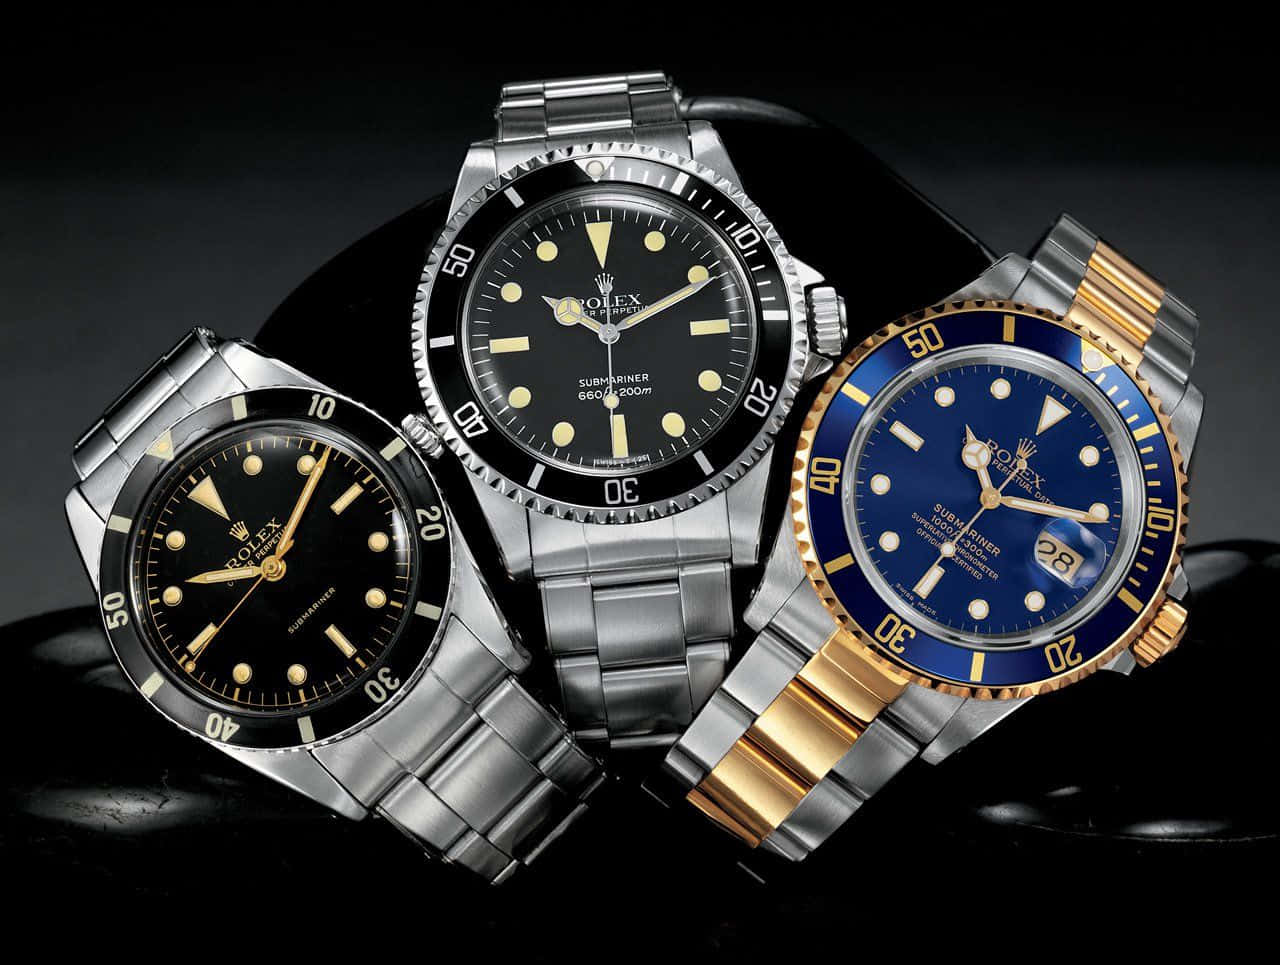 Luxurious Rolex Watch Collection and Timeless Design